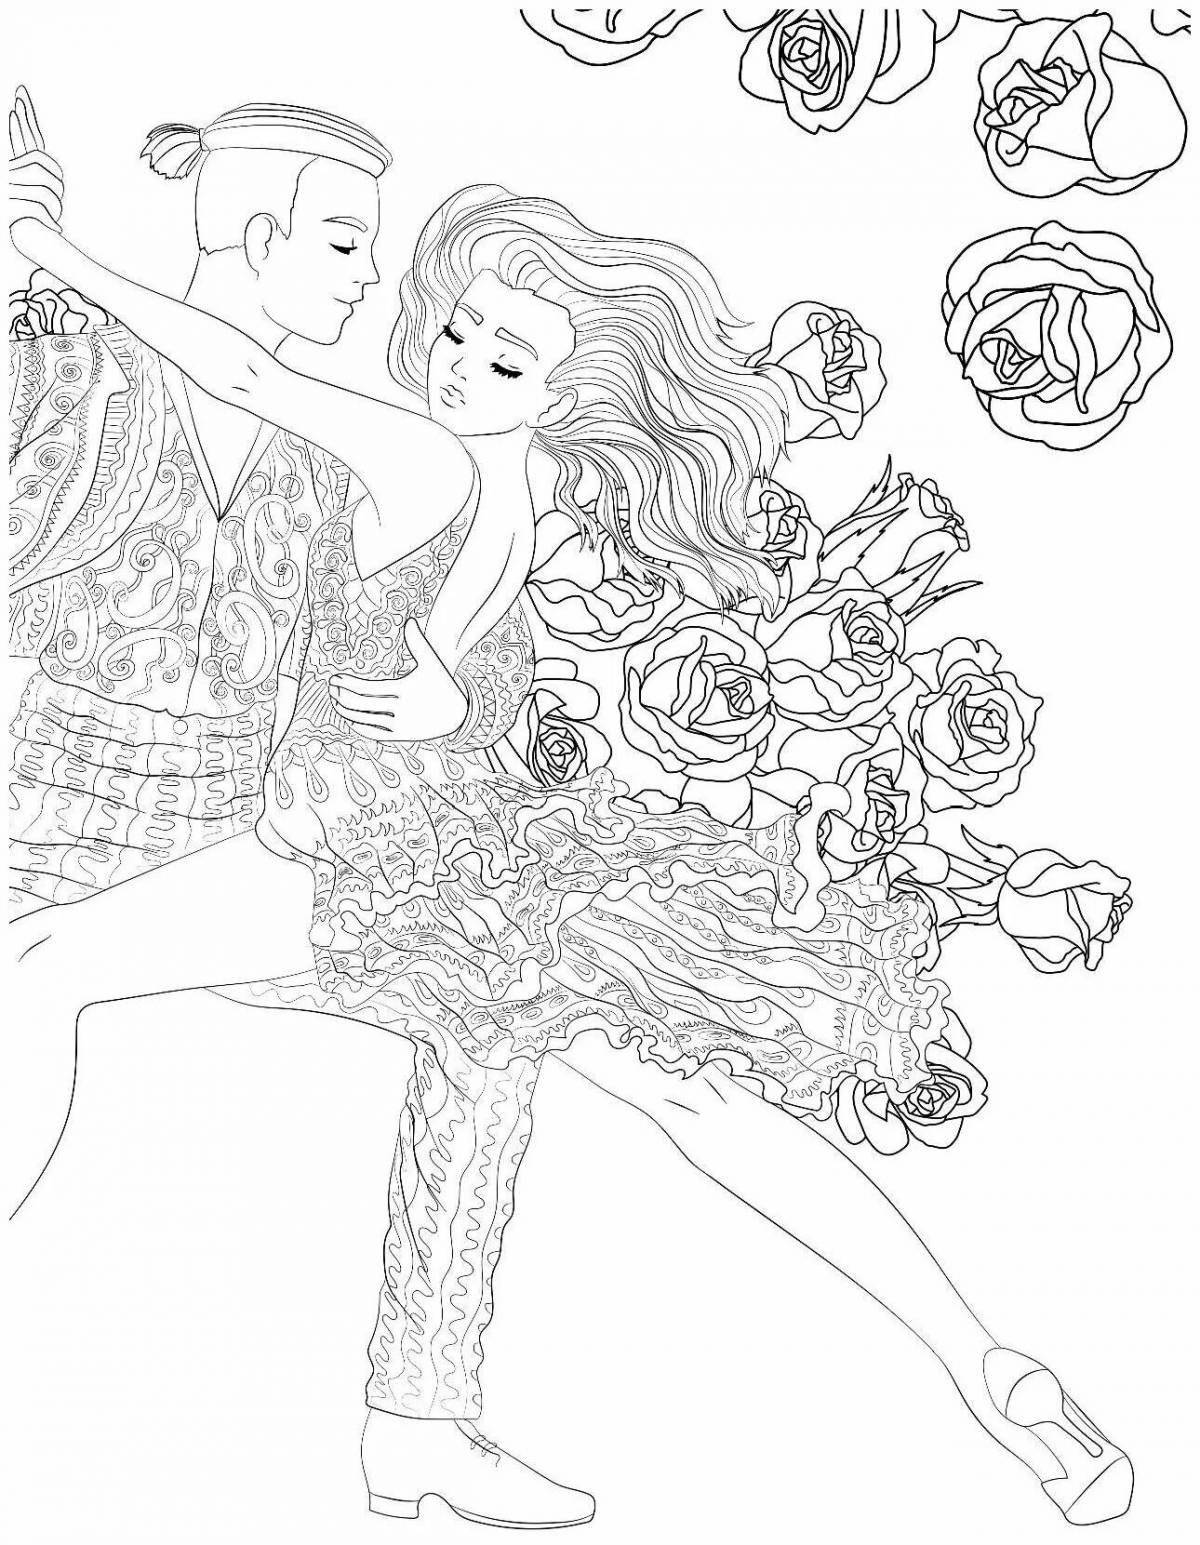 Exmo beautiful coloring page